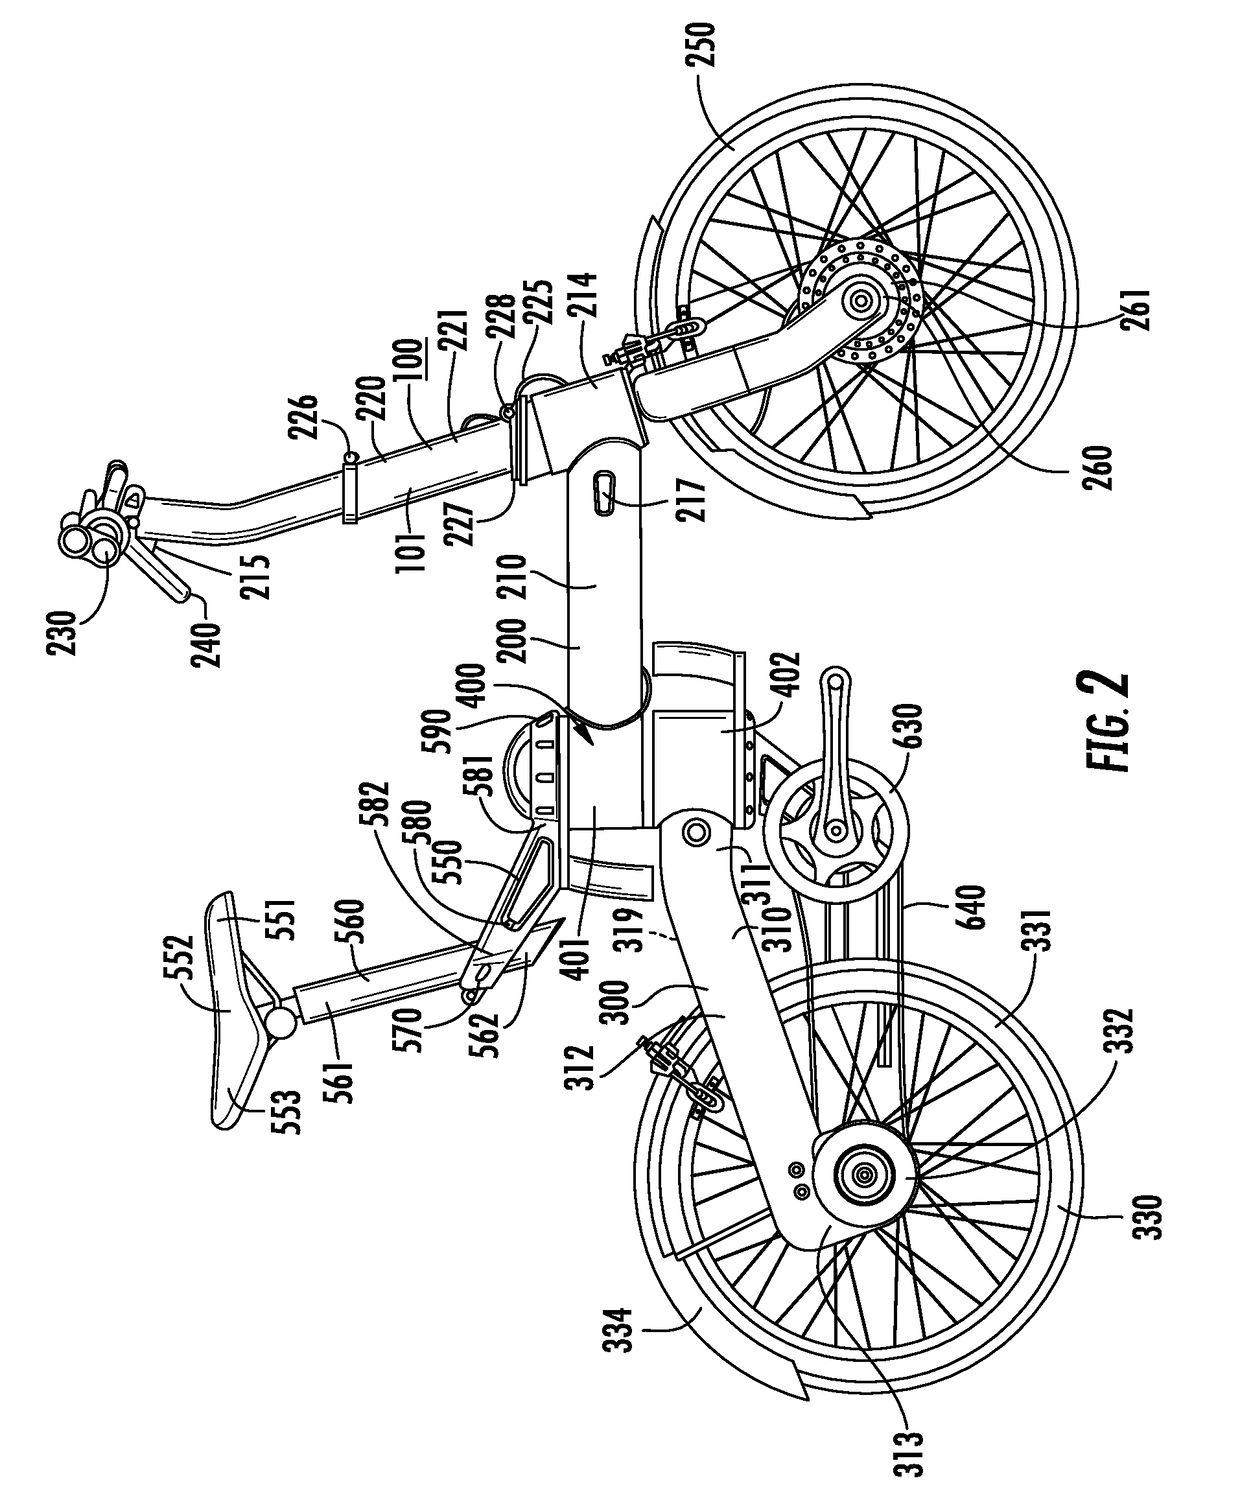 Folding bicycle with electric power train assist